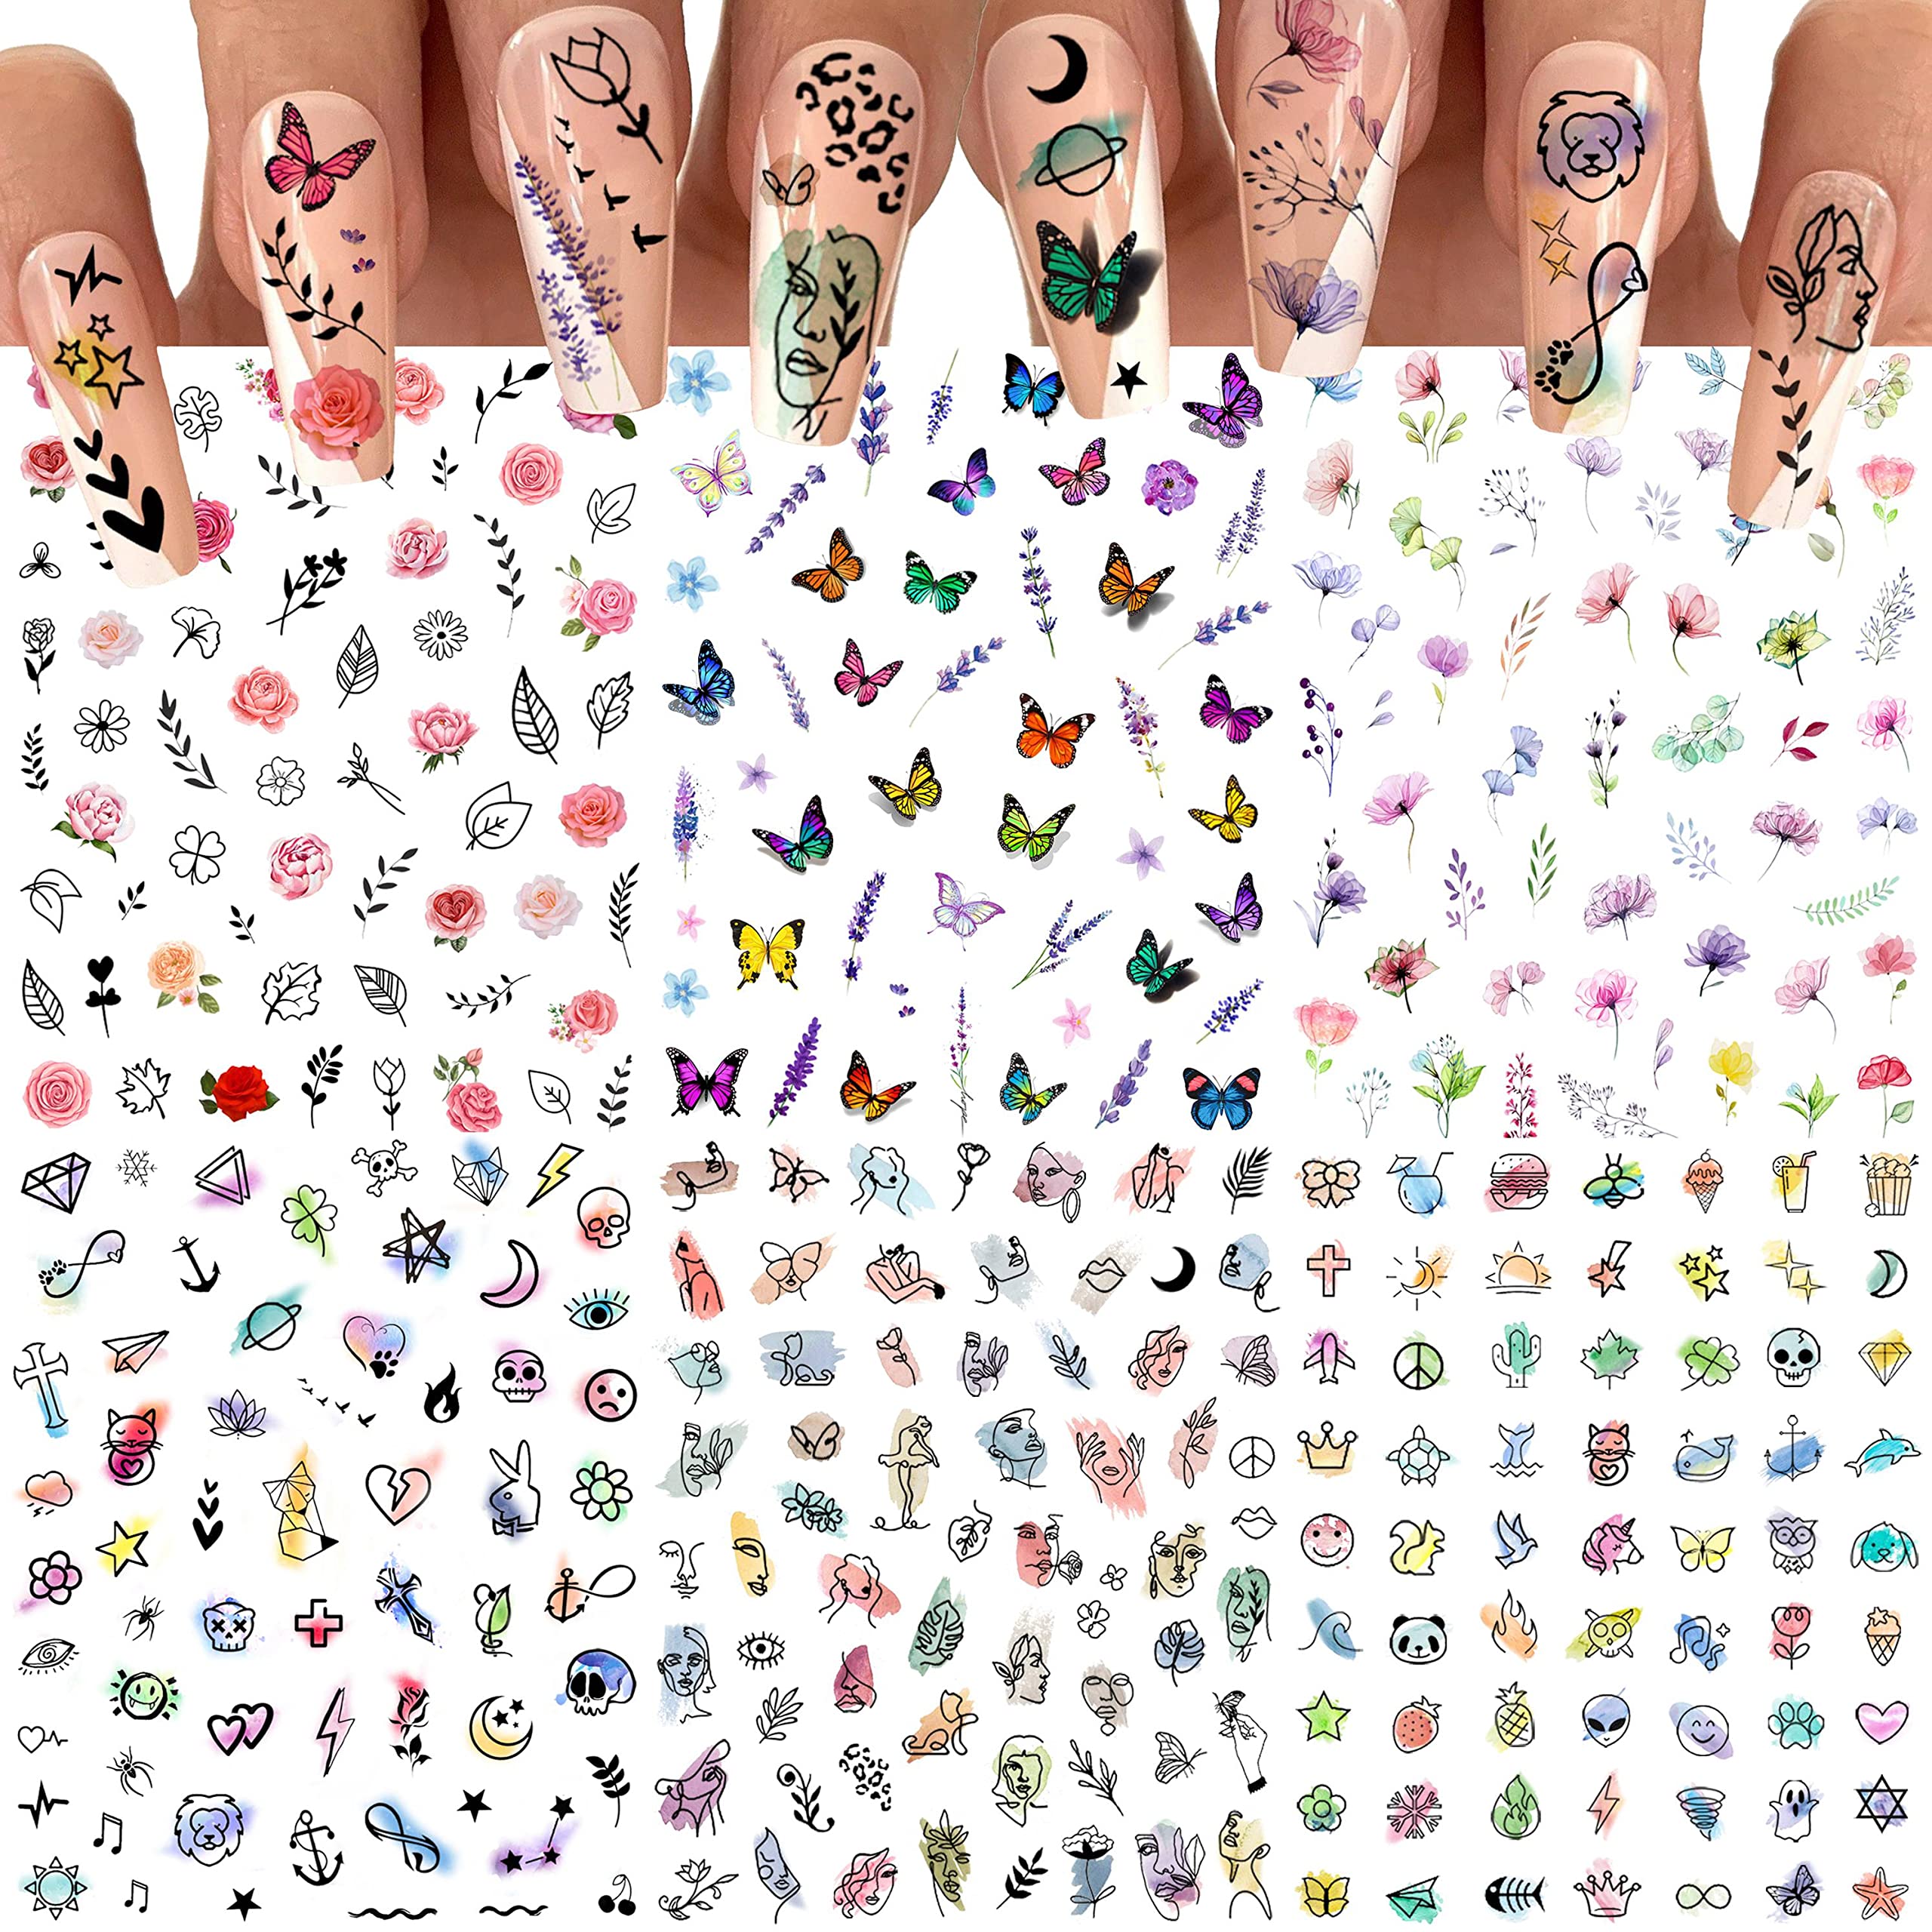 Graffiti Fun Nail Art Stickers, Abstract Nail Decals 3D Self-Adhesive Abstract Lady Face Rose Leaf Nail Design Manicure Tips Nail Decoration for